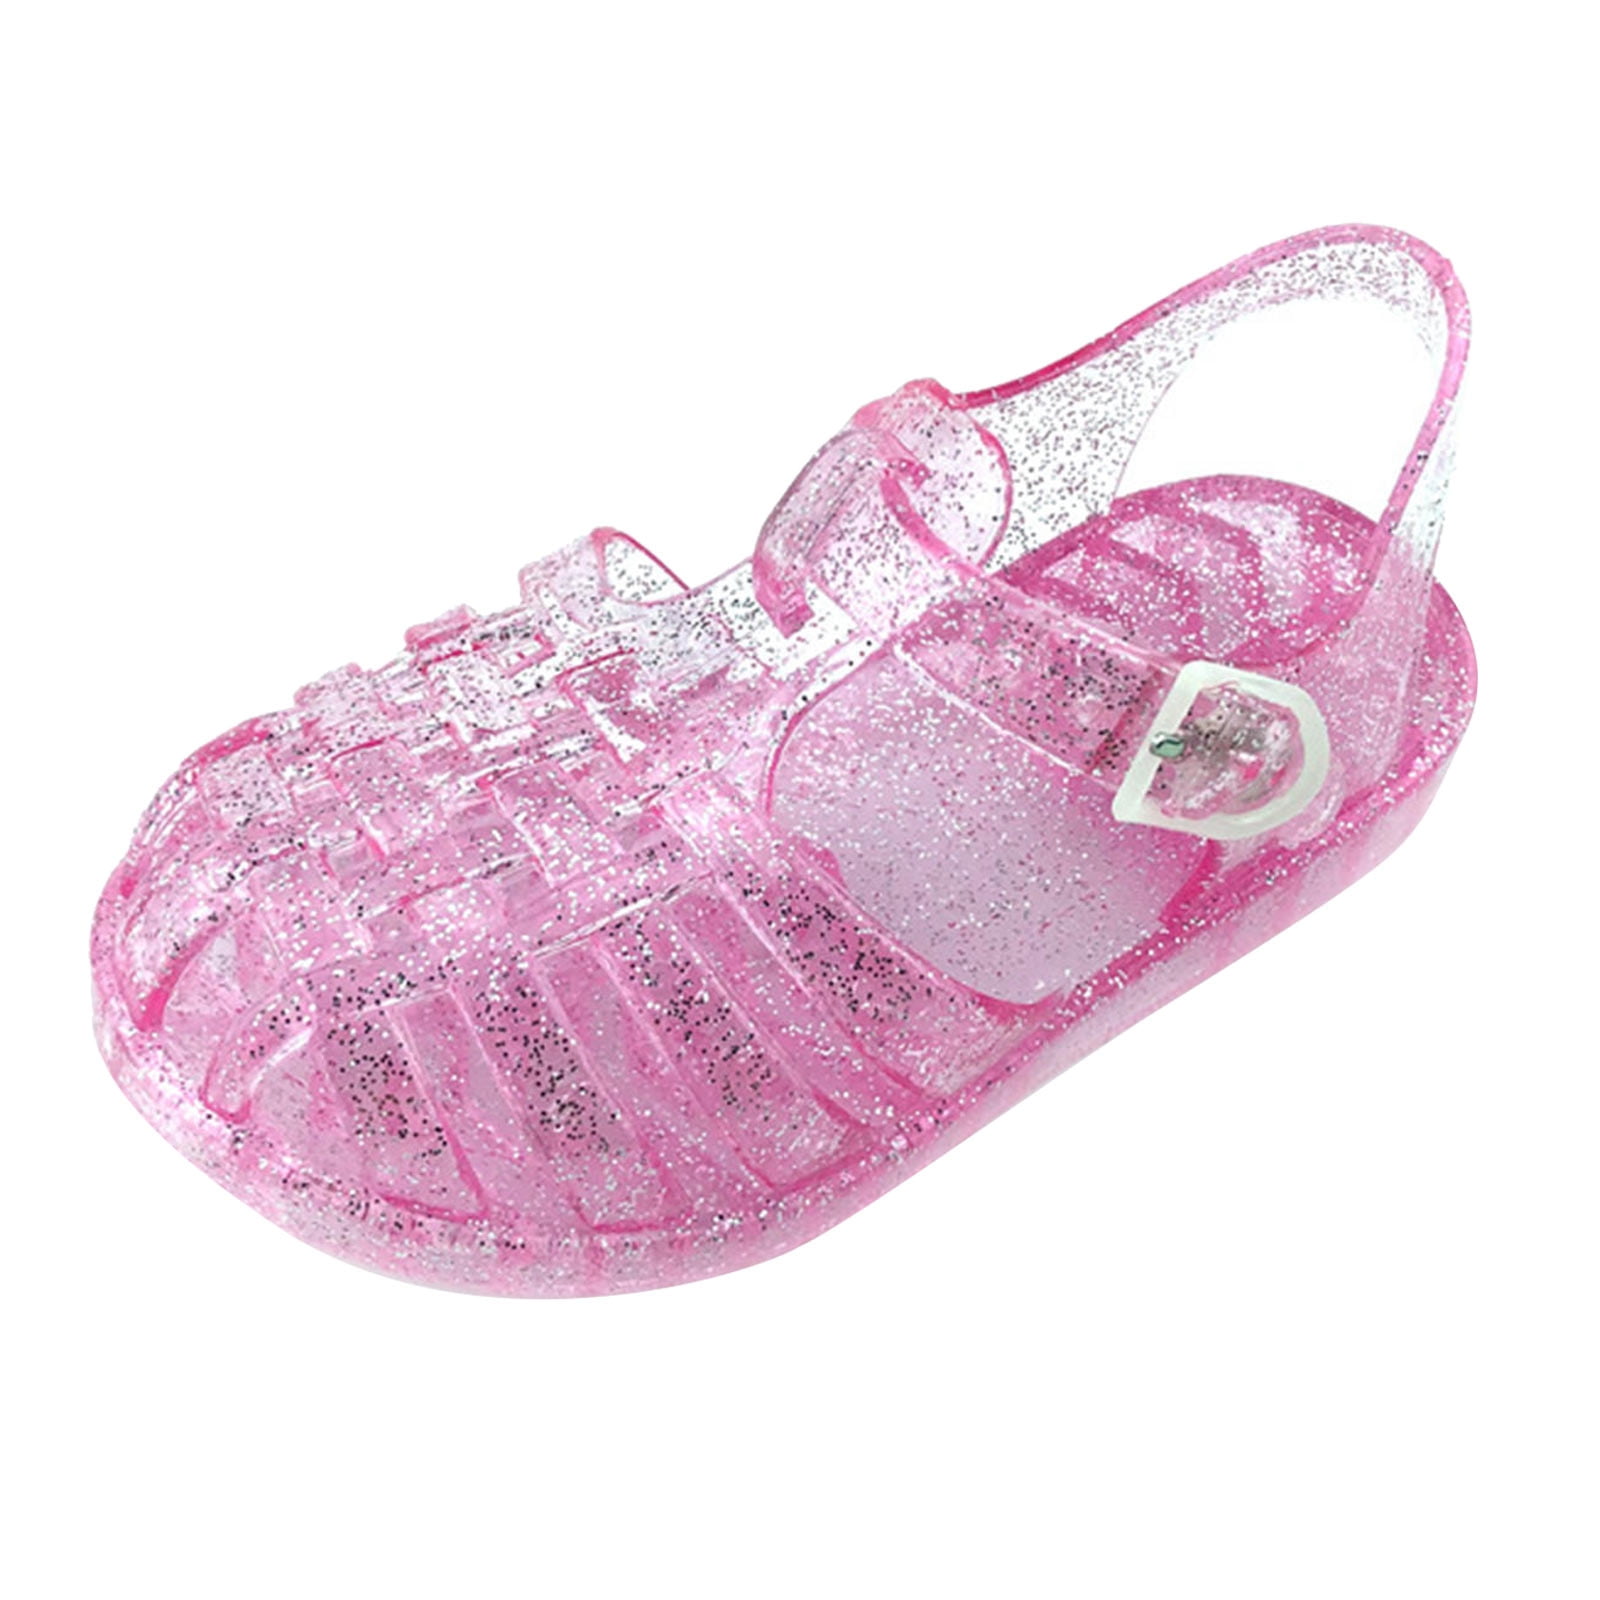 Lovskoo Little Girls Jelly Sandal for 5-6 Years Old Hollow Out Non-slip  Cute Fruit Soft Sole Beach Roman Sandals Pink 